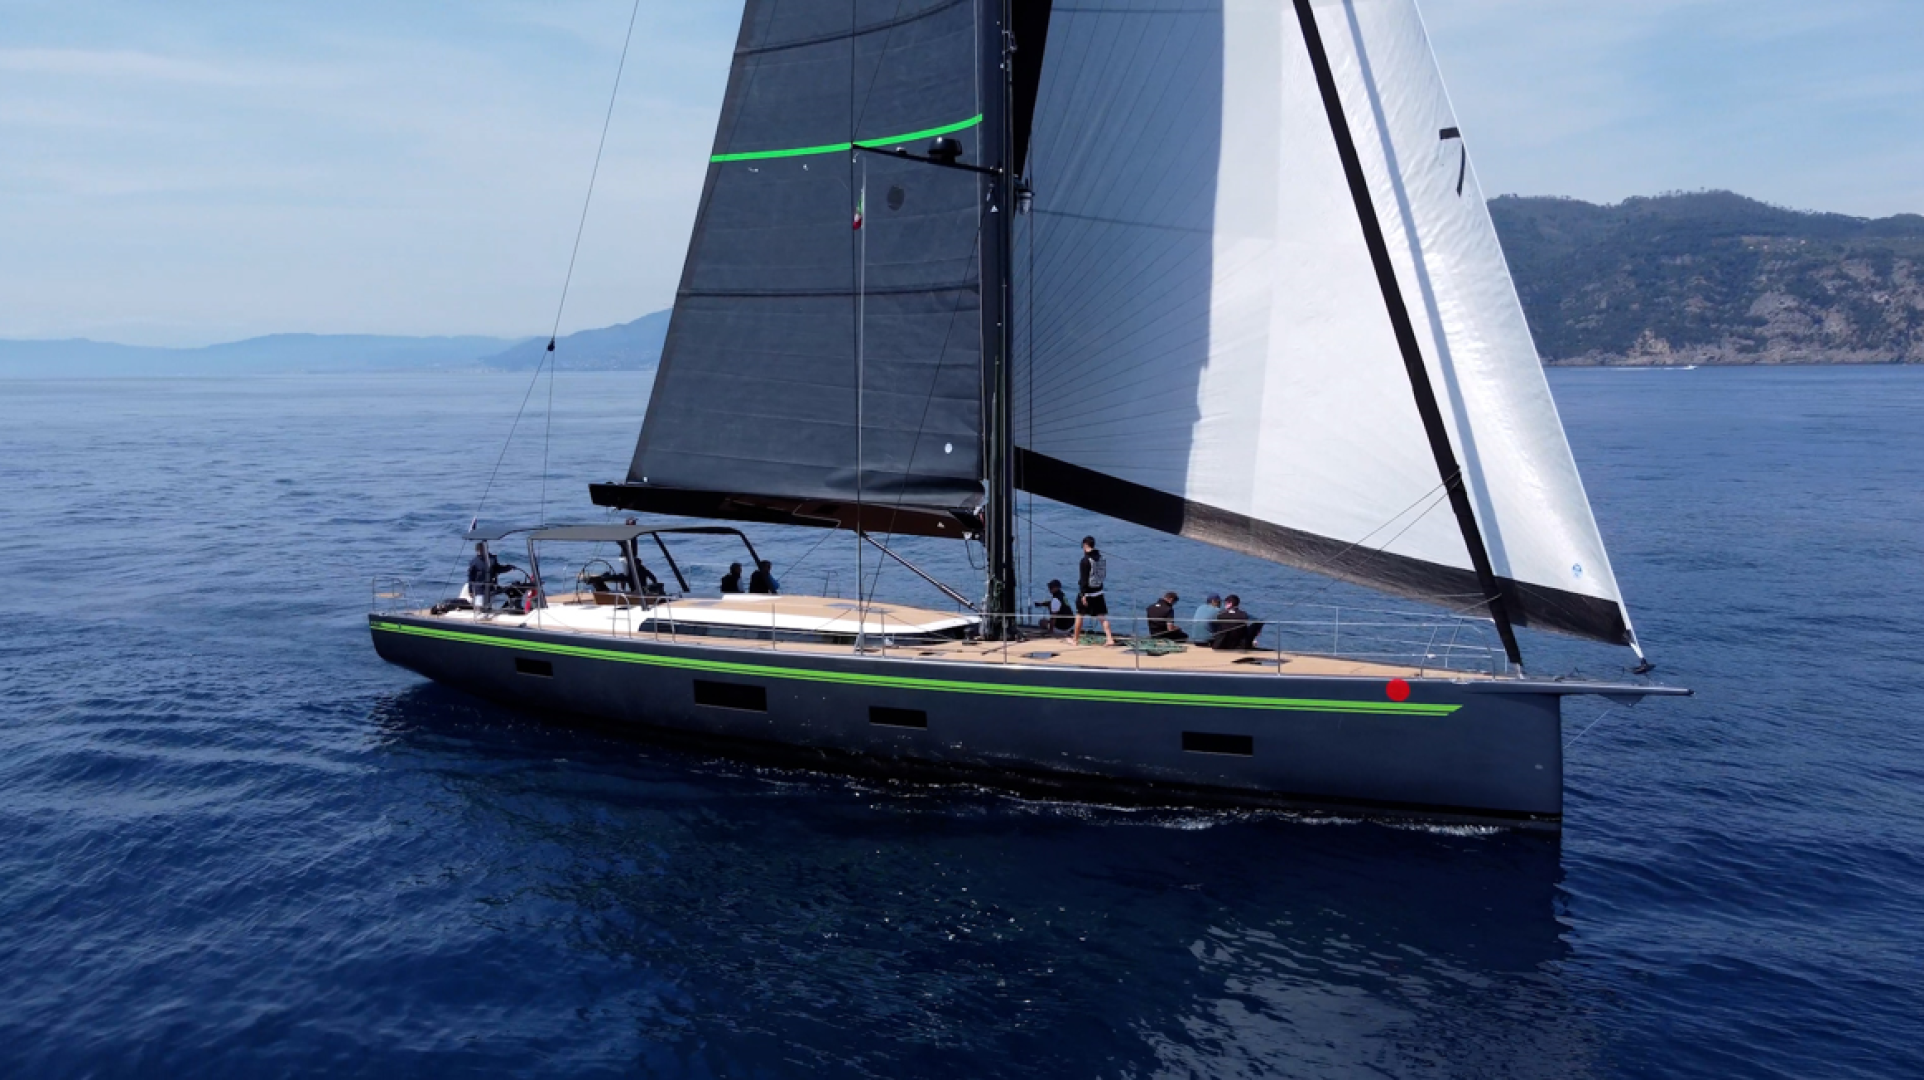 ICE Yachts al Cannes Yachting Festival con due anteprime mondiali